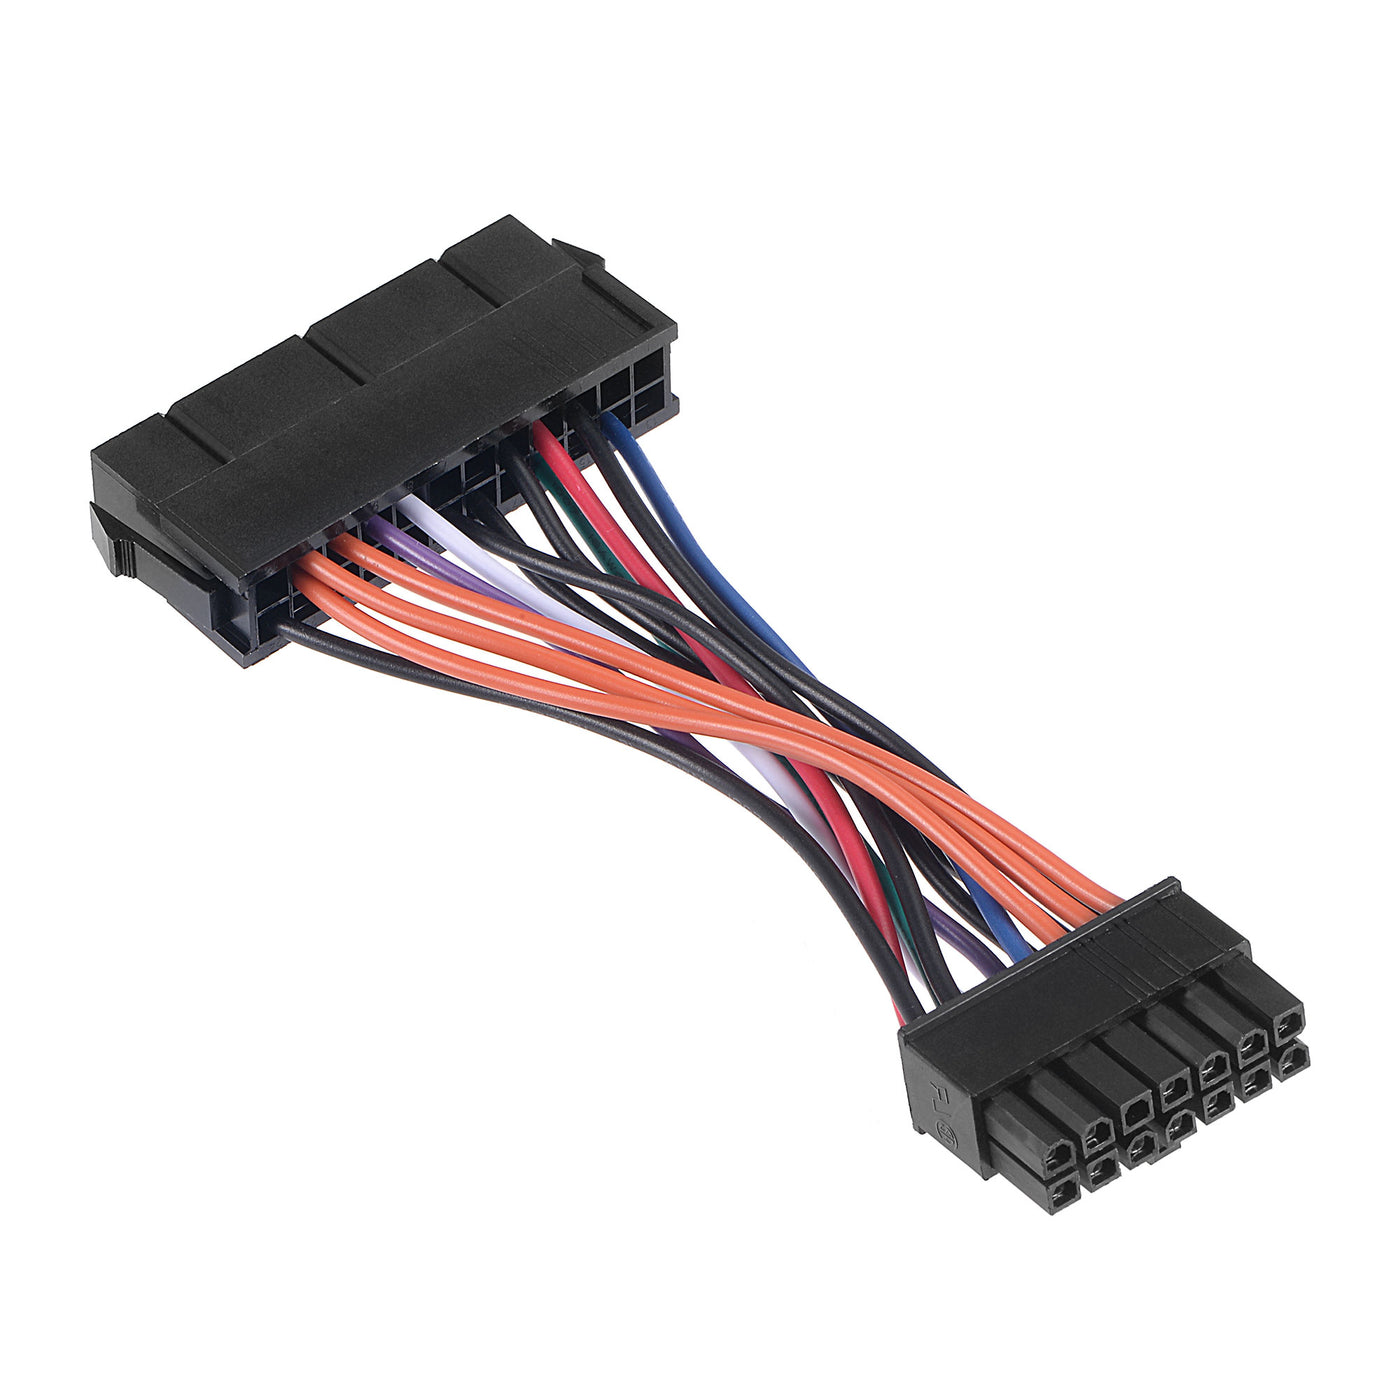 uxcell Uxcell 24 to 14 Pin Mainboard Power Cable for Modular Board 18 AWG 13cm